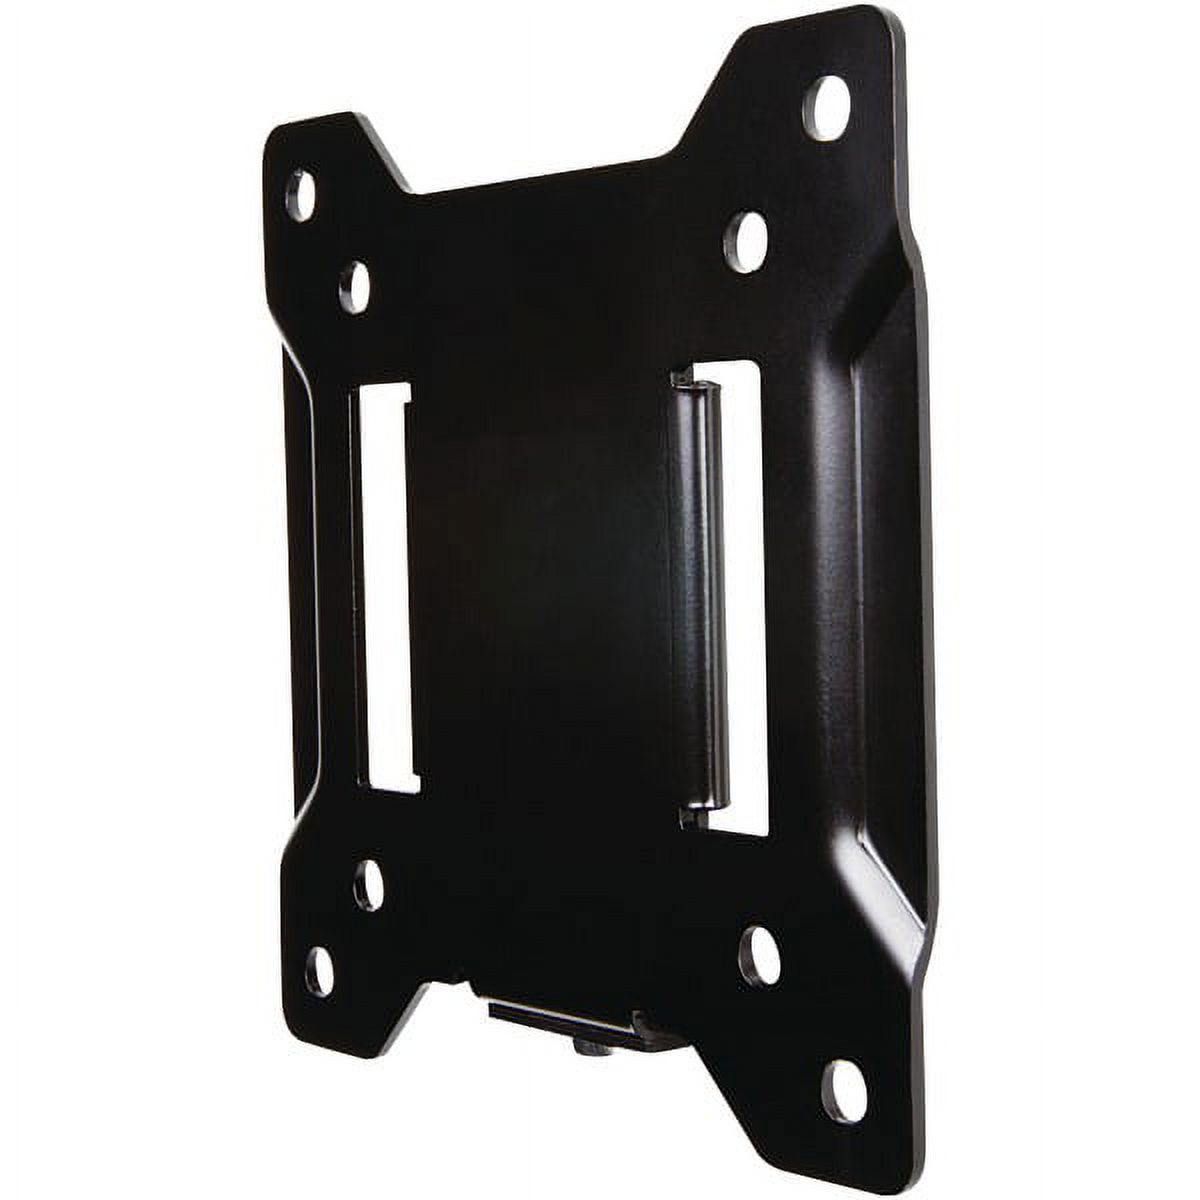 Os50f 13-37 Select Series Low-profile Fixed Mount - image 1 of 1